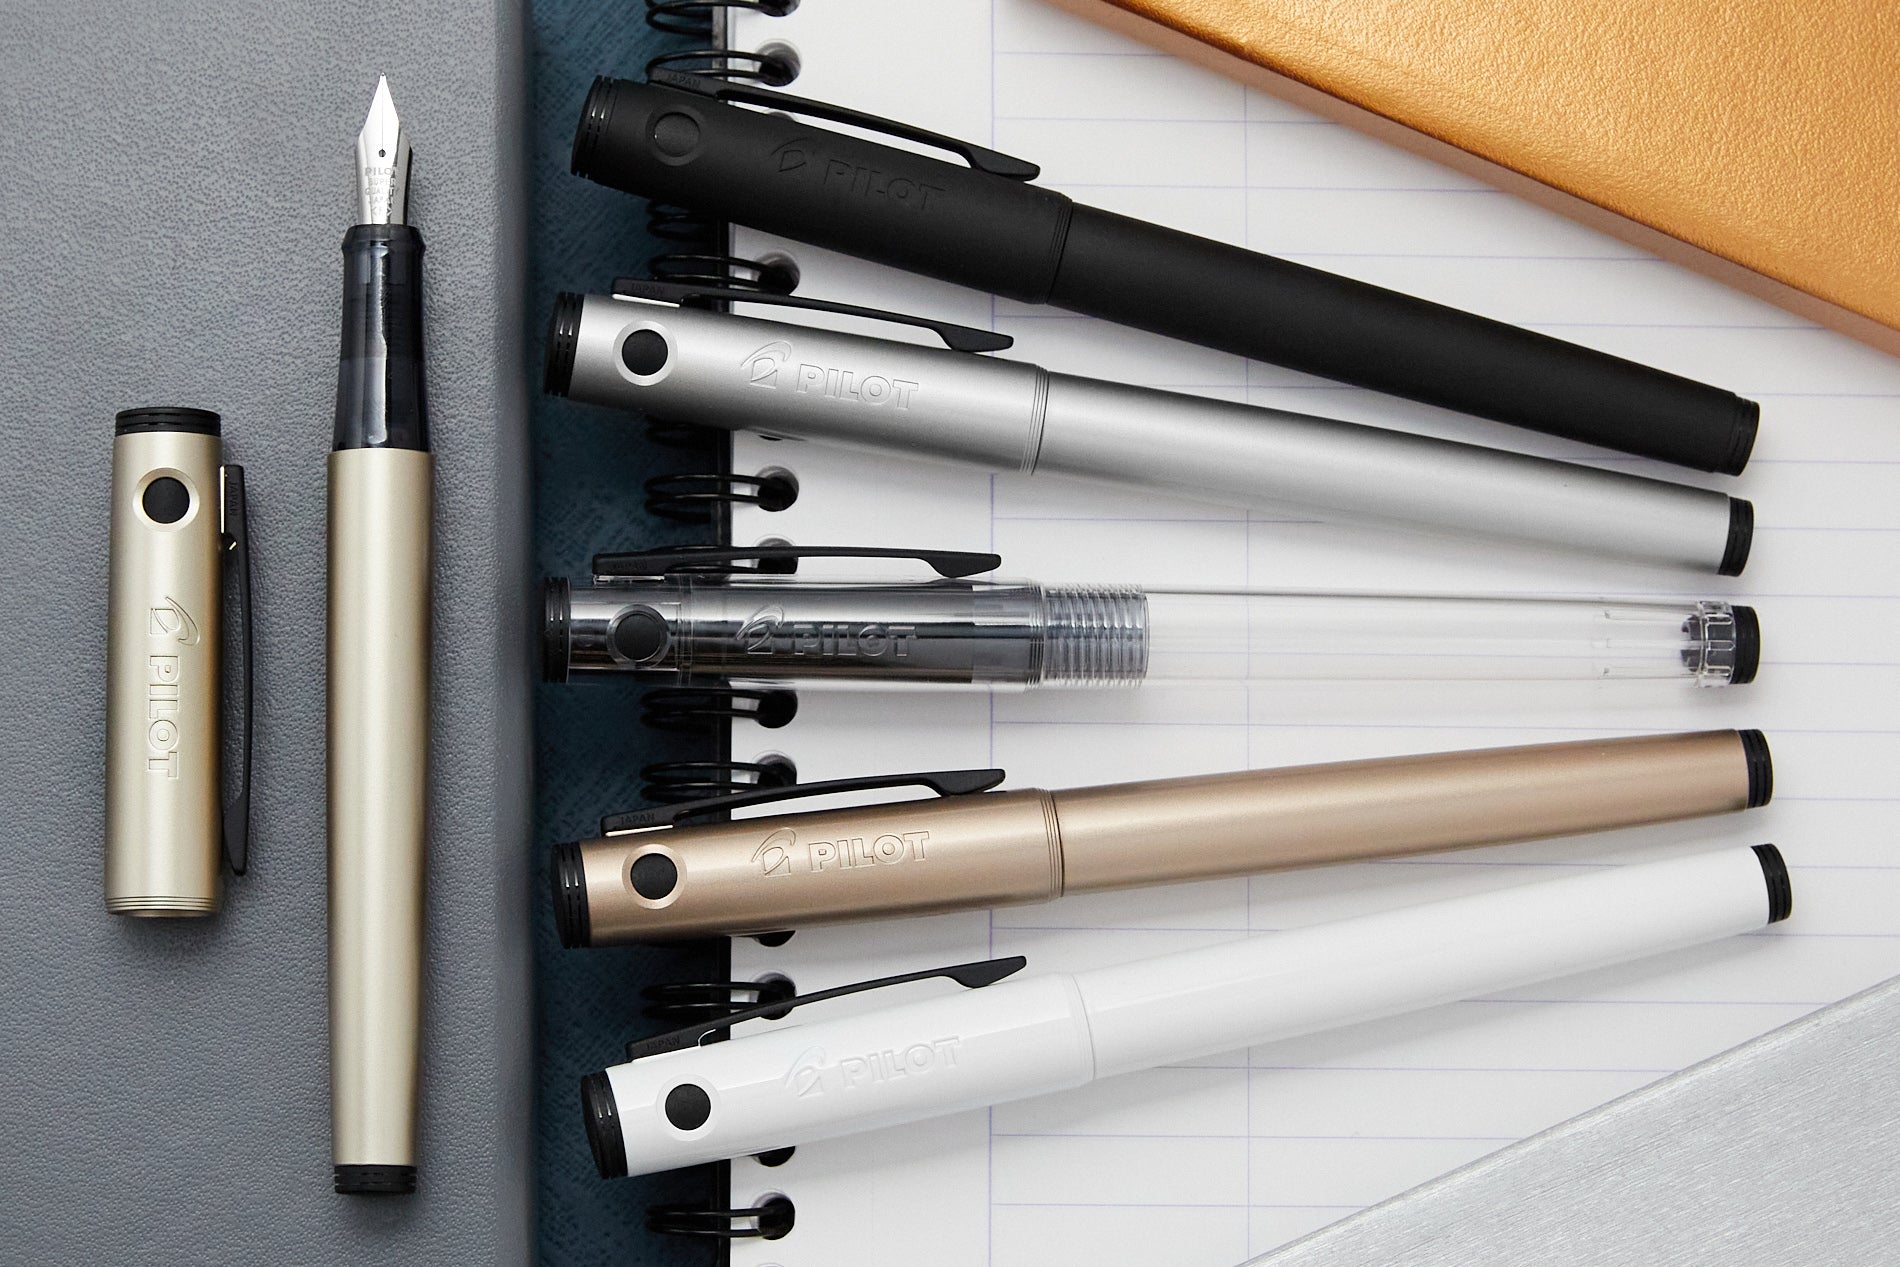 Metallic looking fountain pens fanned out in a row